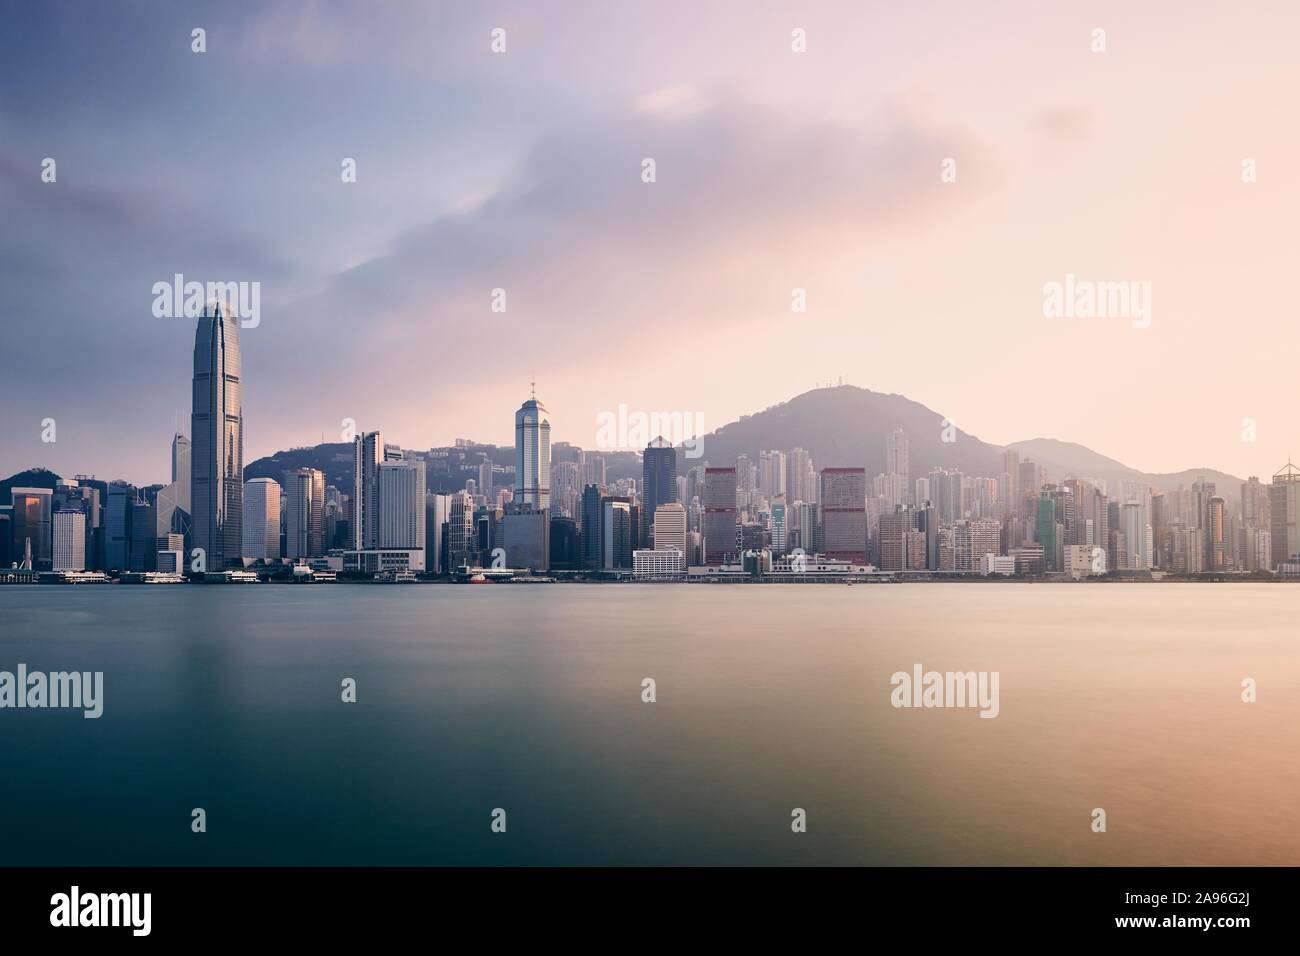 Modern city at sunset. Victoria Harbour and urban skyline with skyscrapers, Hong Kong. Stock Photo